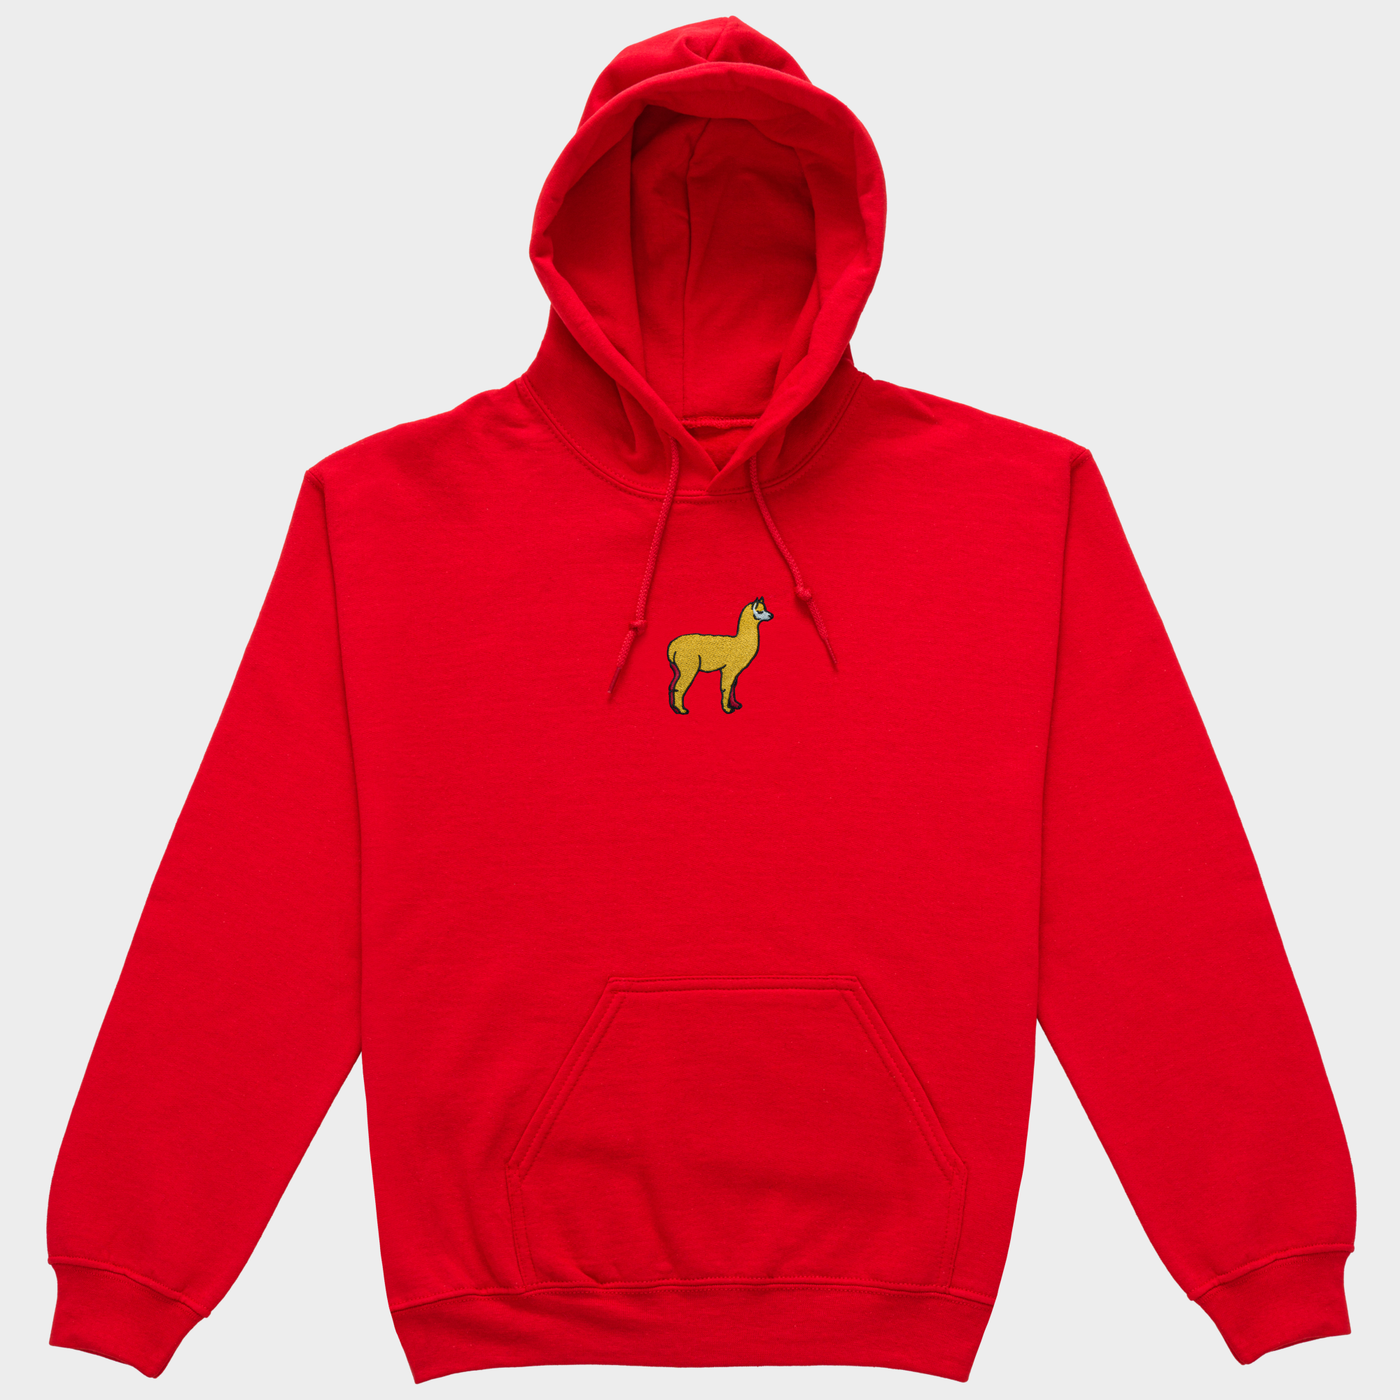 Bobby's Planet Women's Embroidered Alpaca Hoodie from South American Amazon Animals Collection in Red Color#color_red